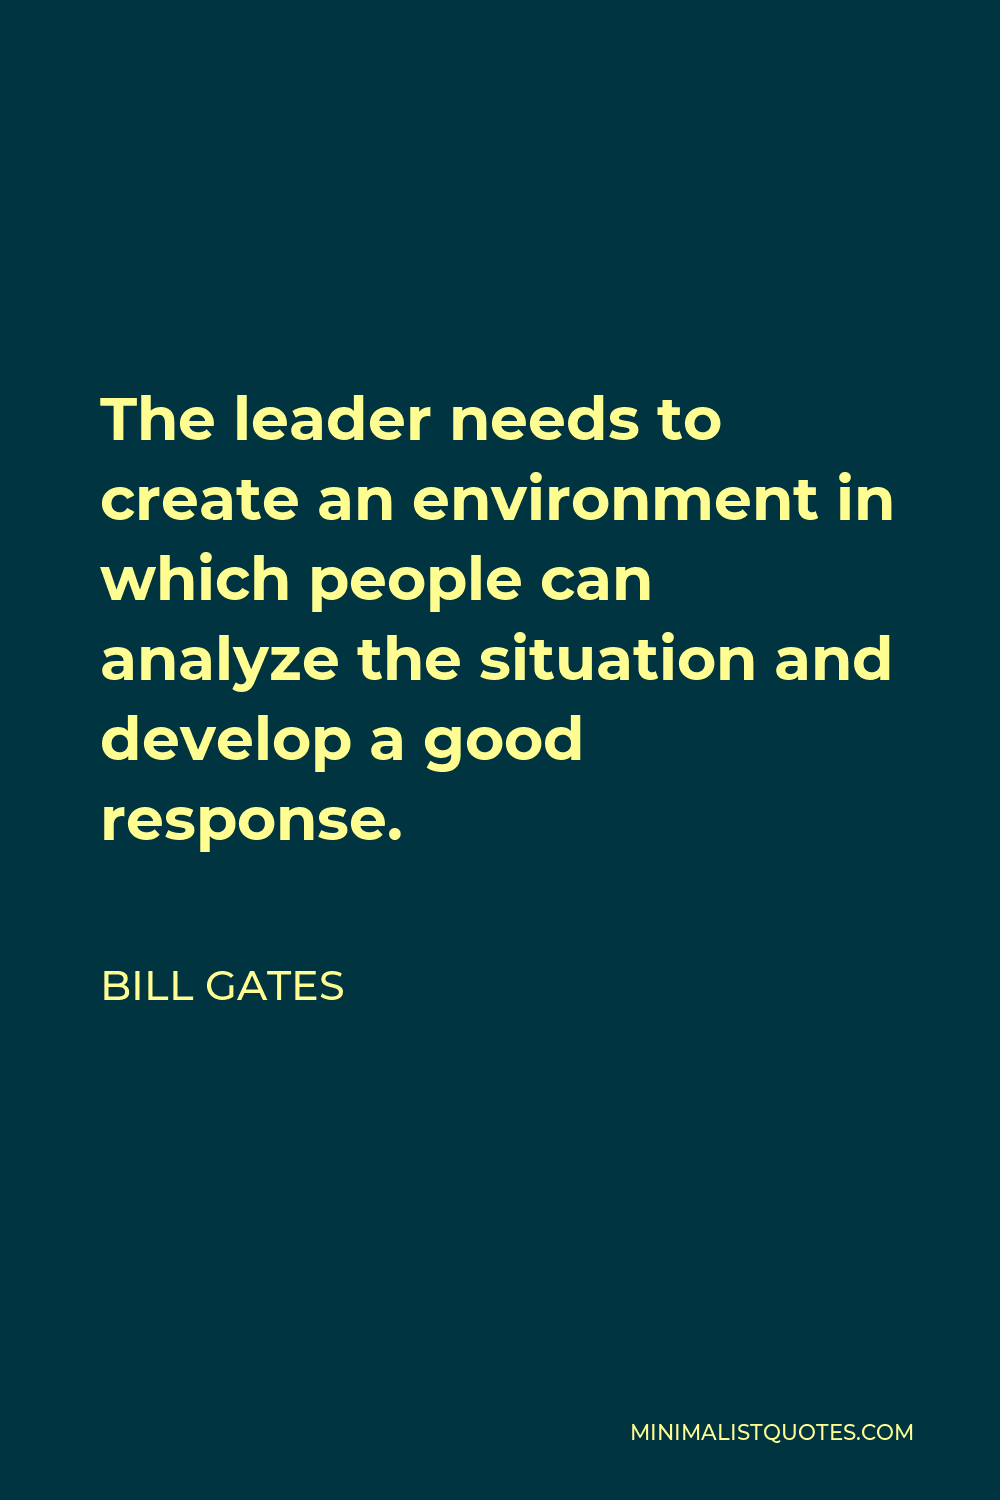 Bill Gates Quote - The leader needs to create an environment in which people can analyze the situation and develop a good response.